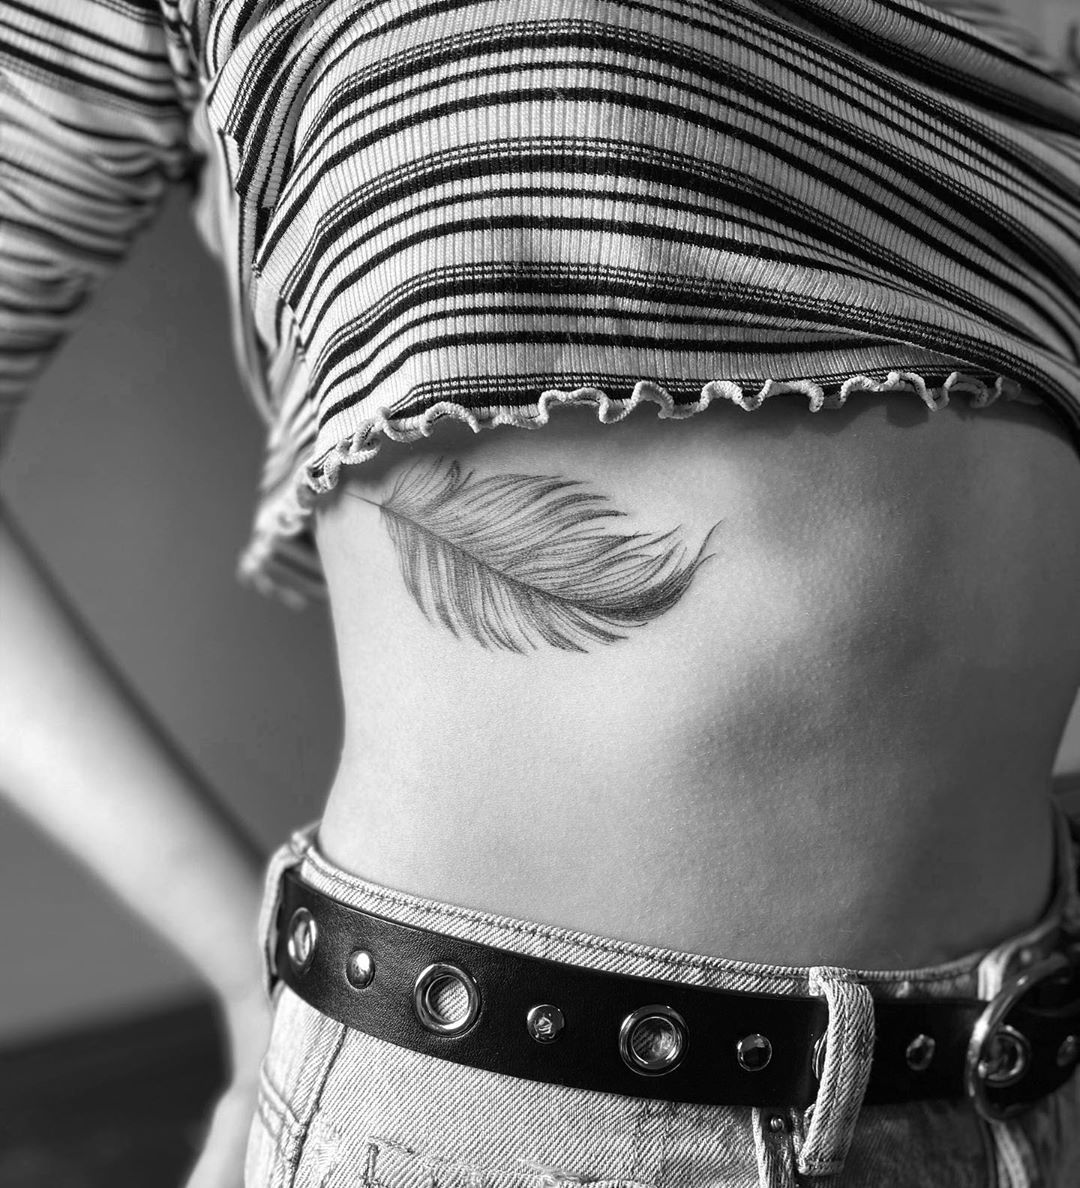 25 Charming Rib Tattoos Designs to Try in 2019